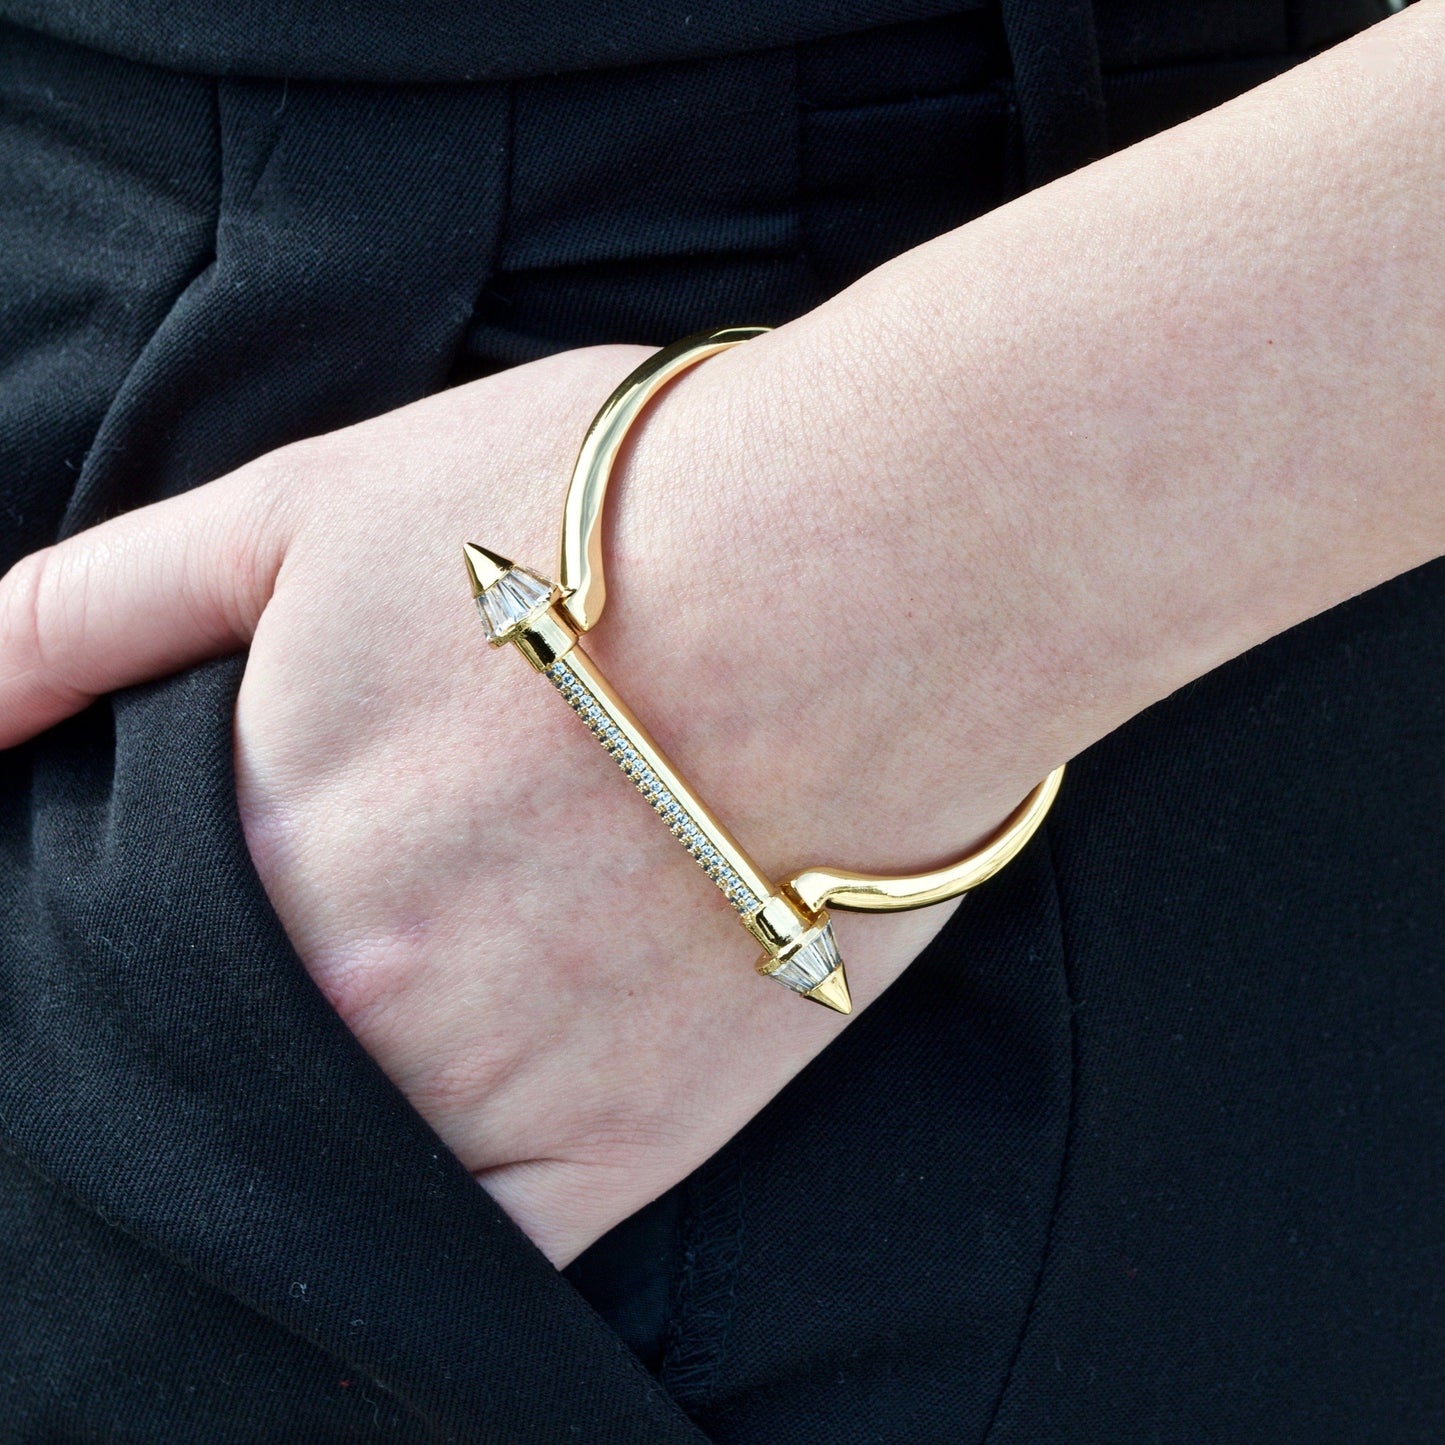 Gold Pointed Screw Cuff Bracelet - Opes Robur